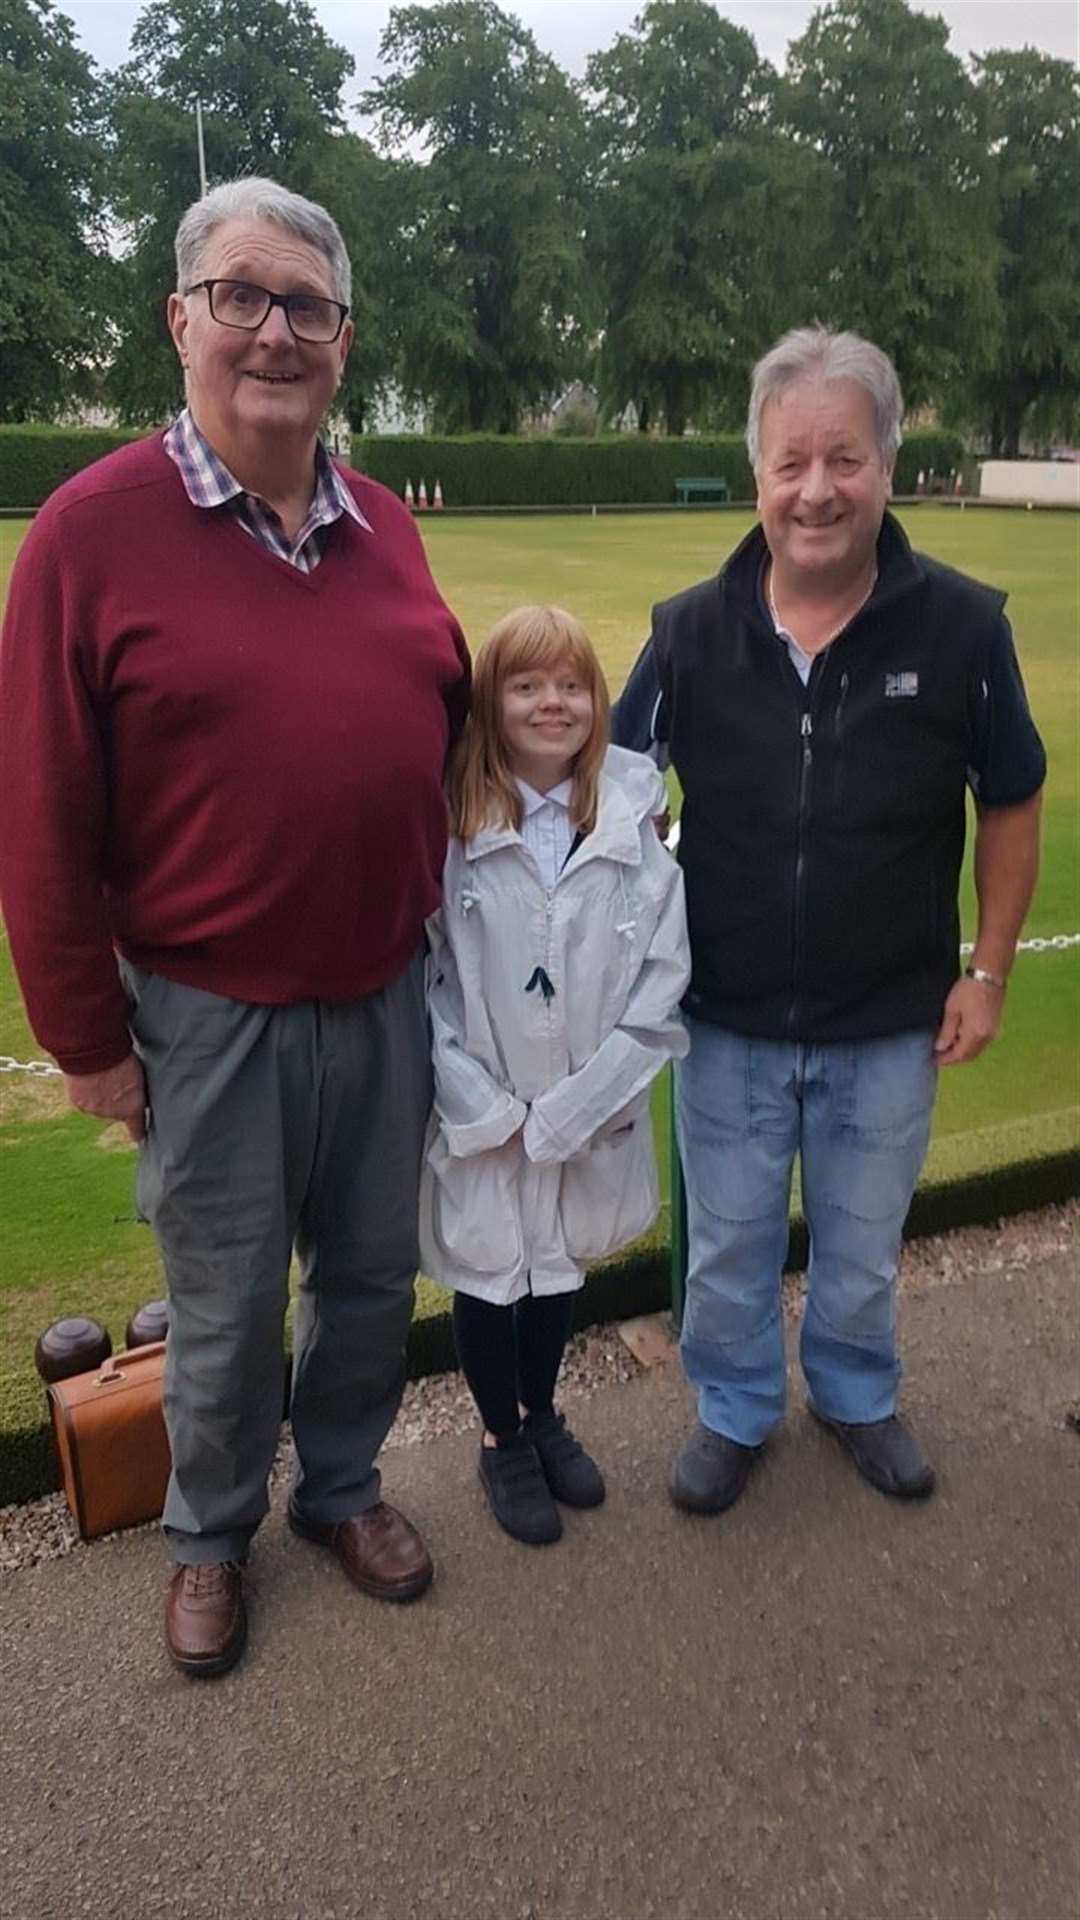 Young Forres bowler Caitlin Dustan with Derek Crosby and John Ross.